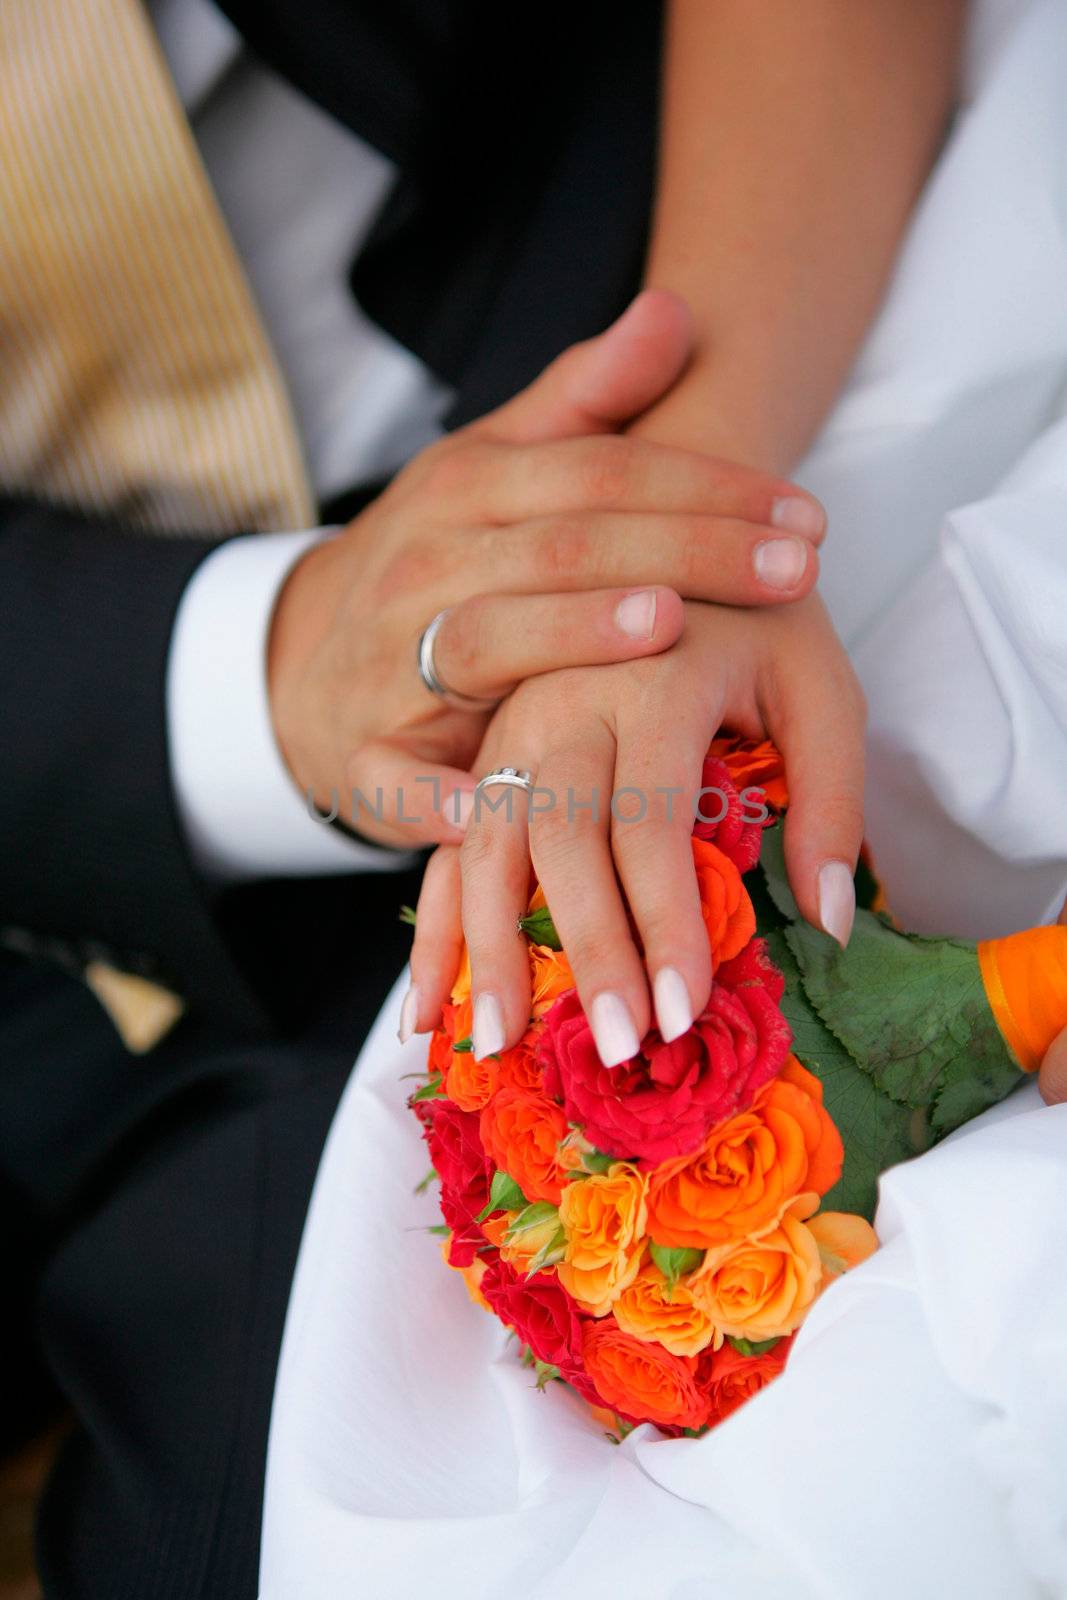 Close up portrait of newlywed man and wife holding hands over bouquet of colorful flowers and petals.